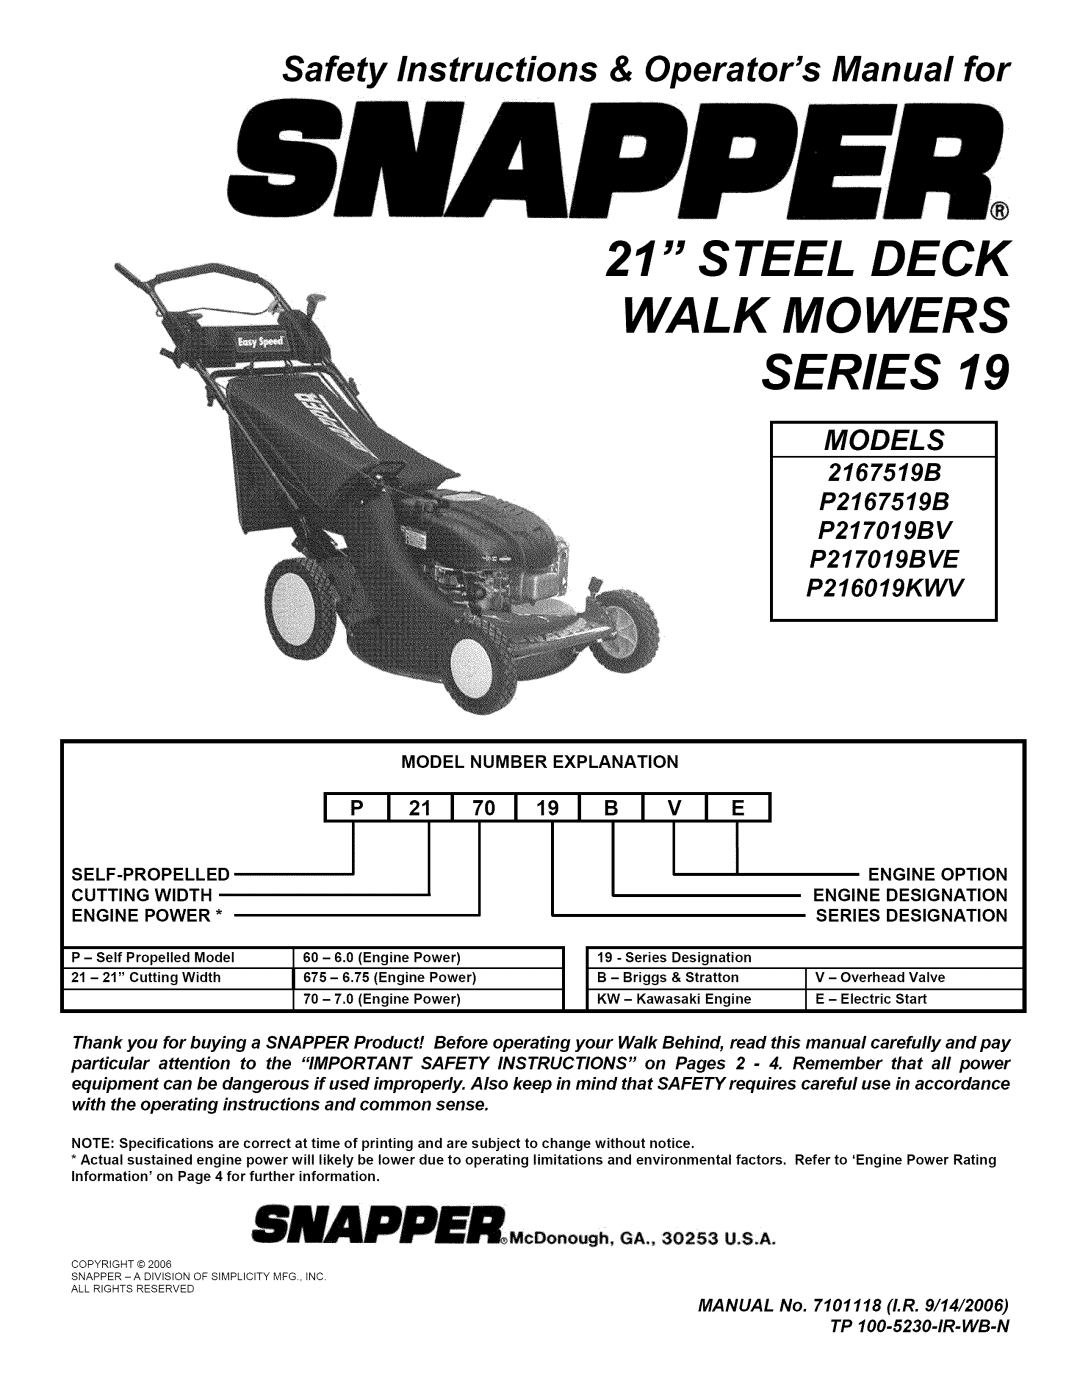 Snapper P2167519B important safety instructions Steel Deck Walk Mowers Series, Safety Instructions & Operators Manual for 